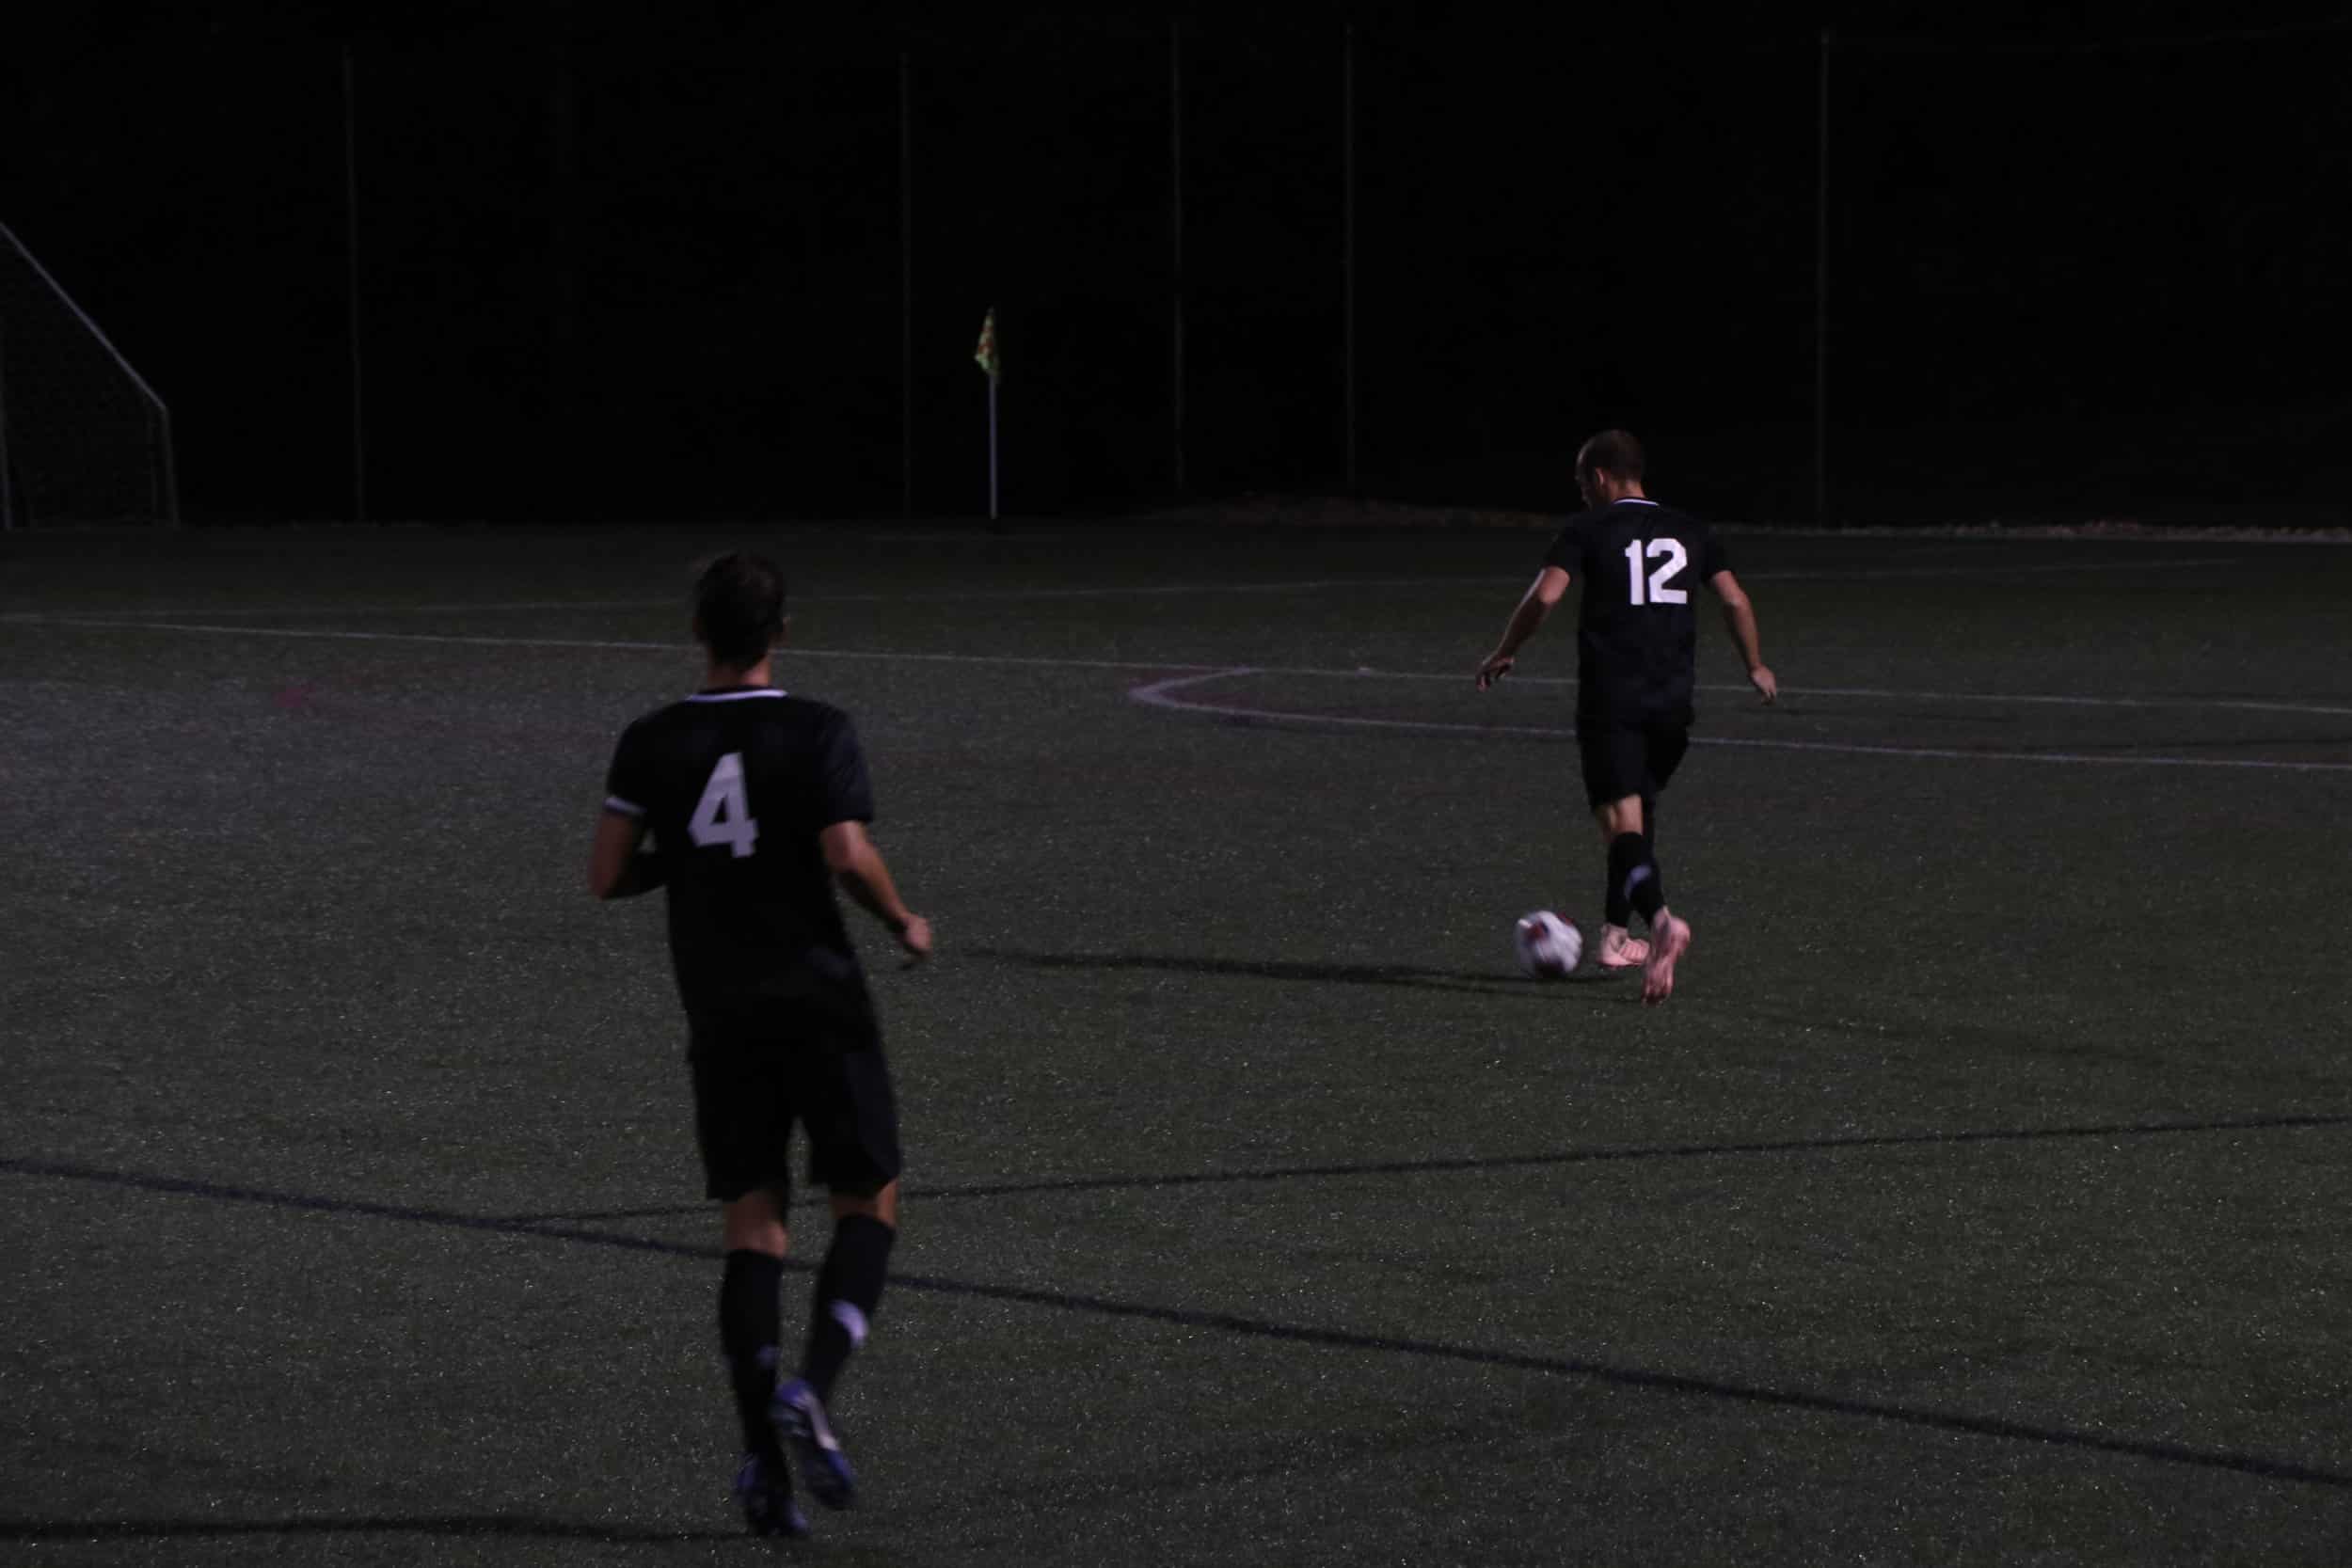 Senior, Marlon Evans (4) passes the ball to senior, Gus Johnson (12) keeping it away from other team.